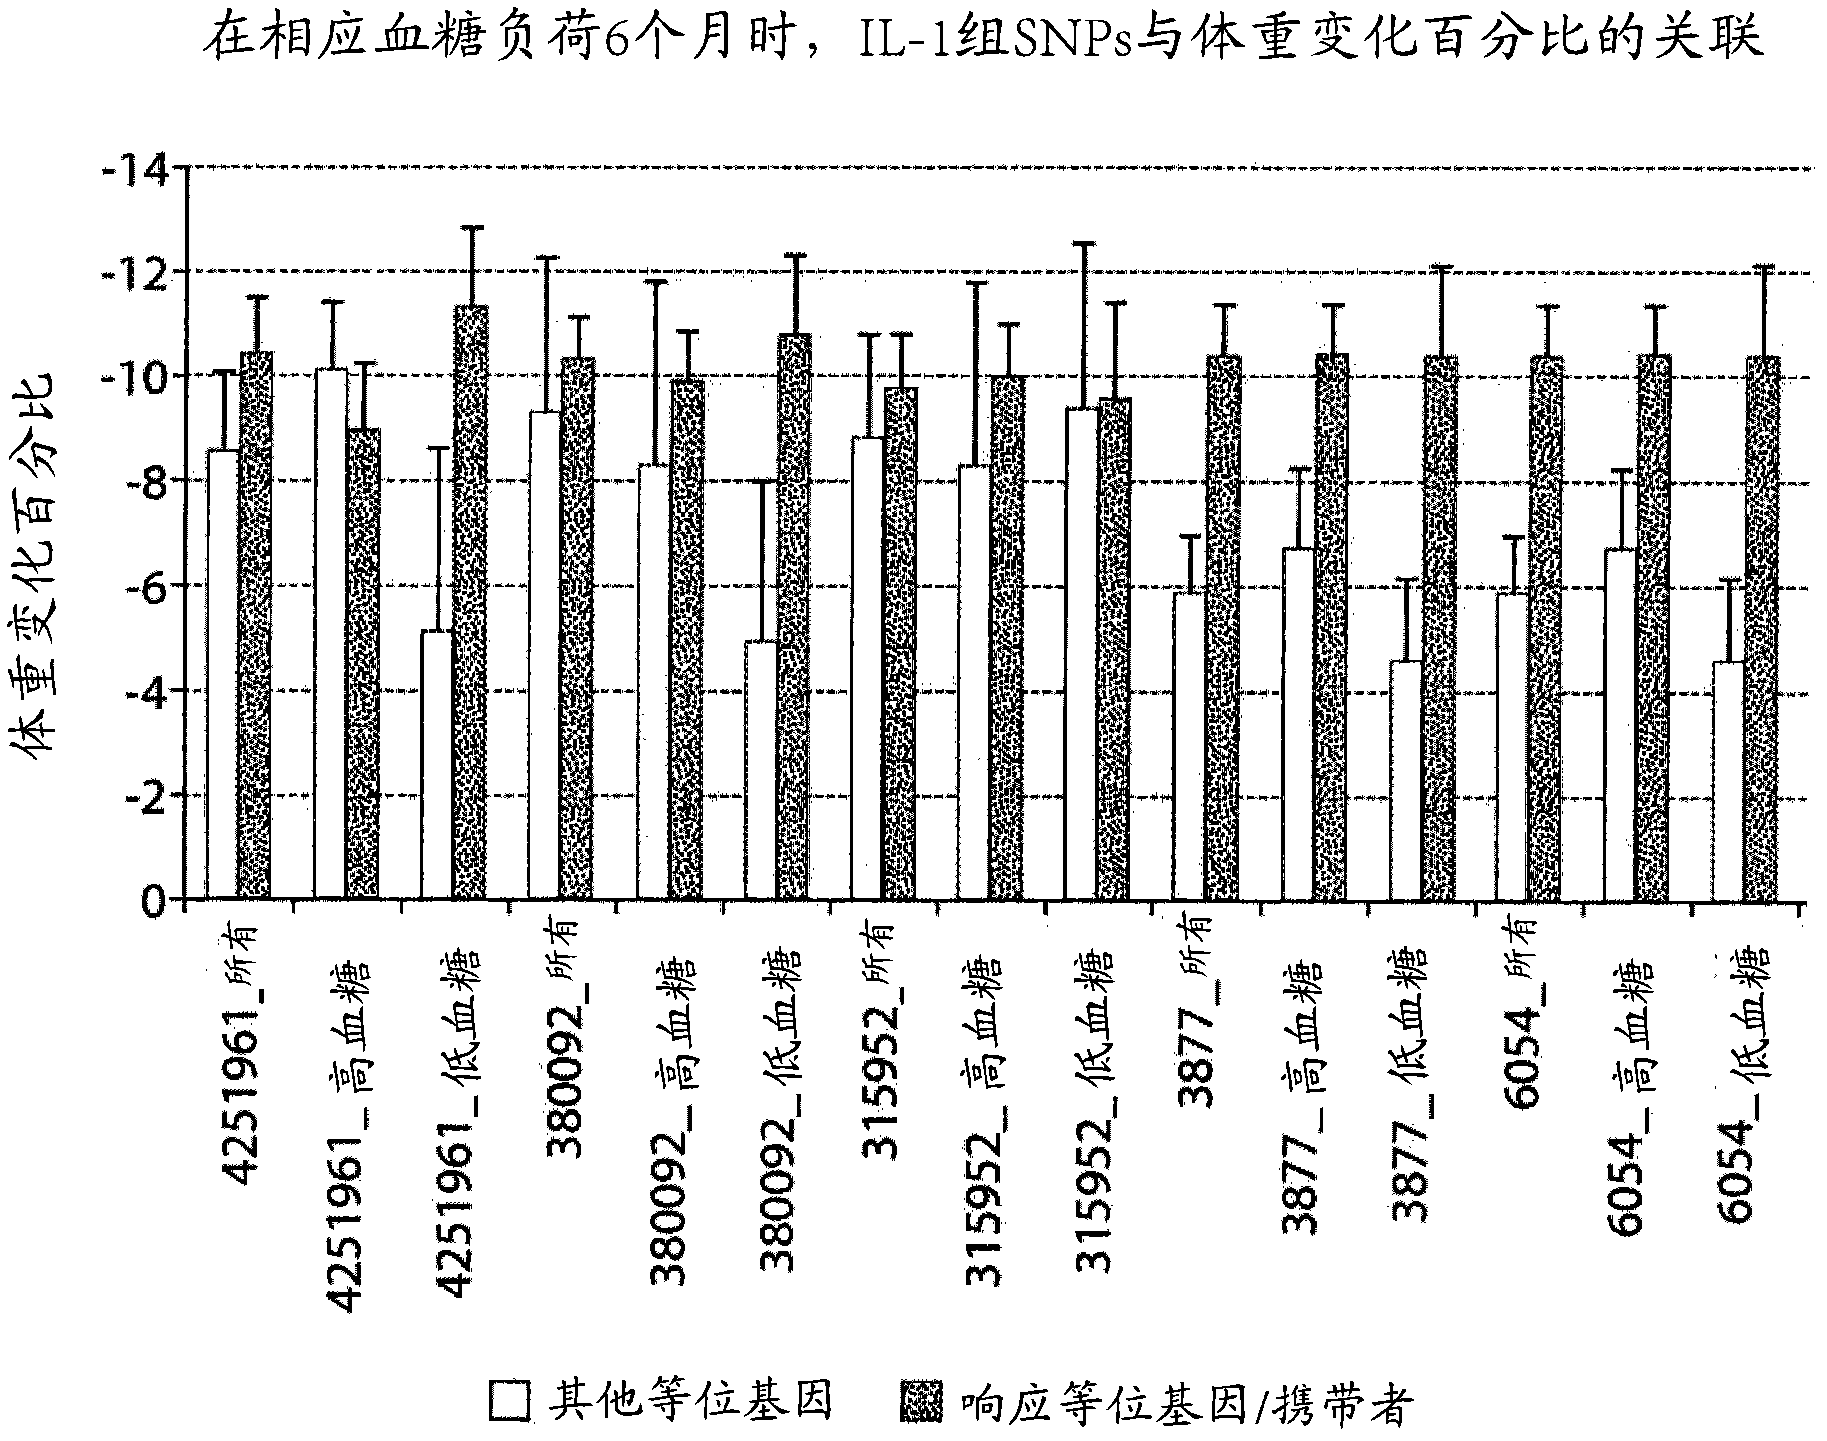 Genetic markers for weight management and methods of use thereof